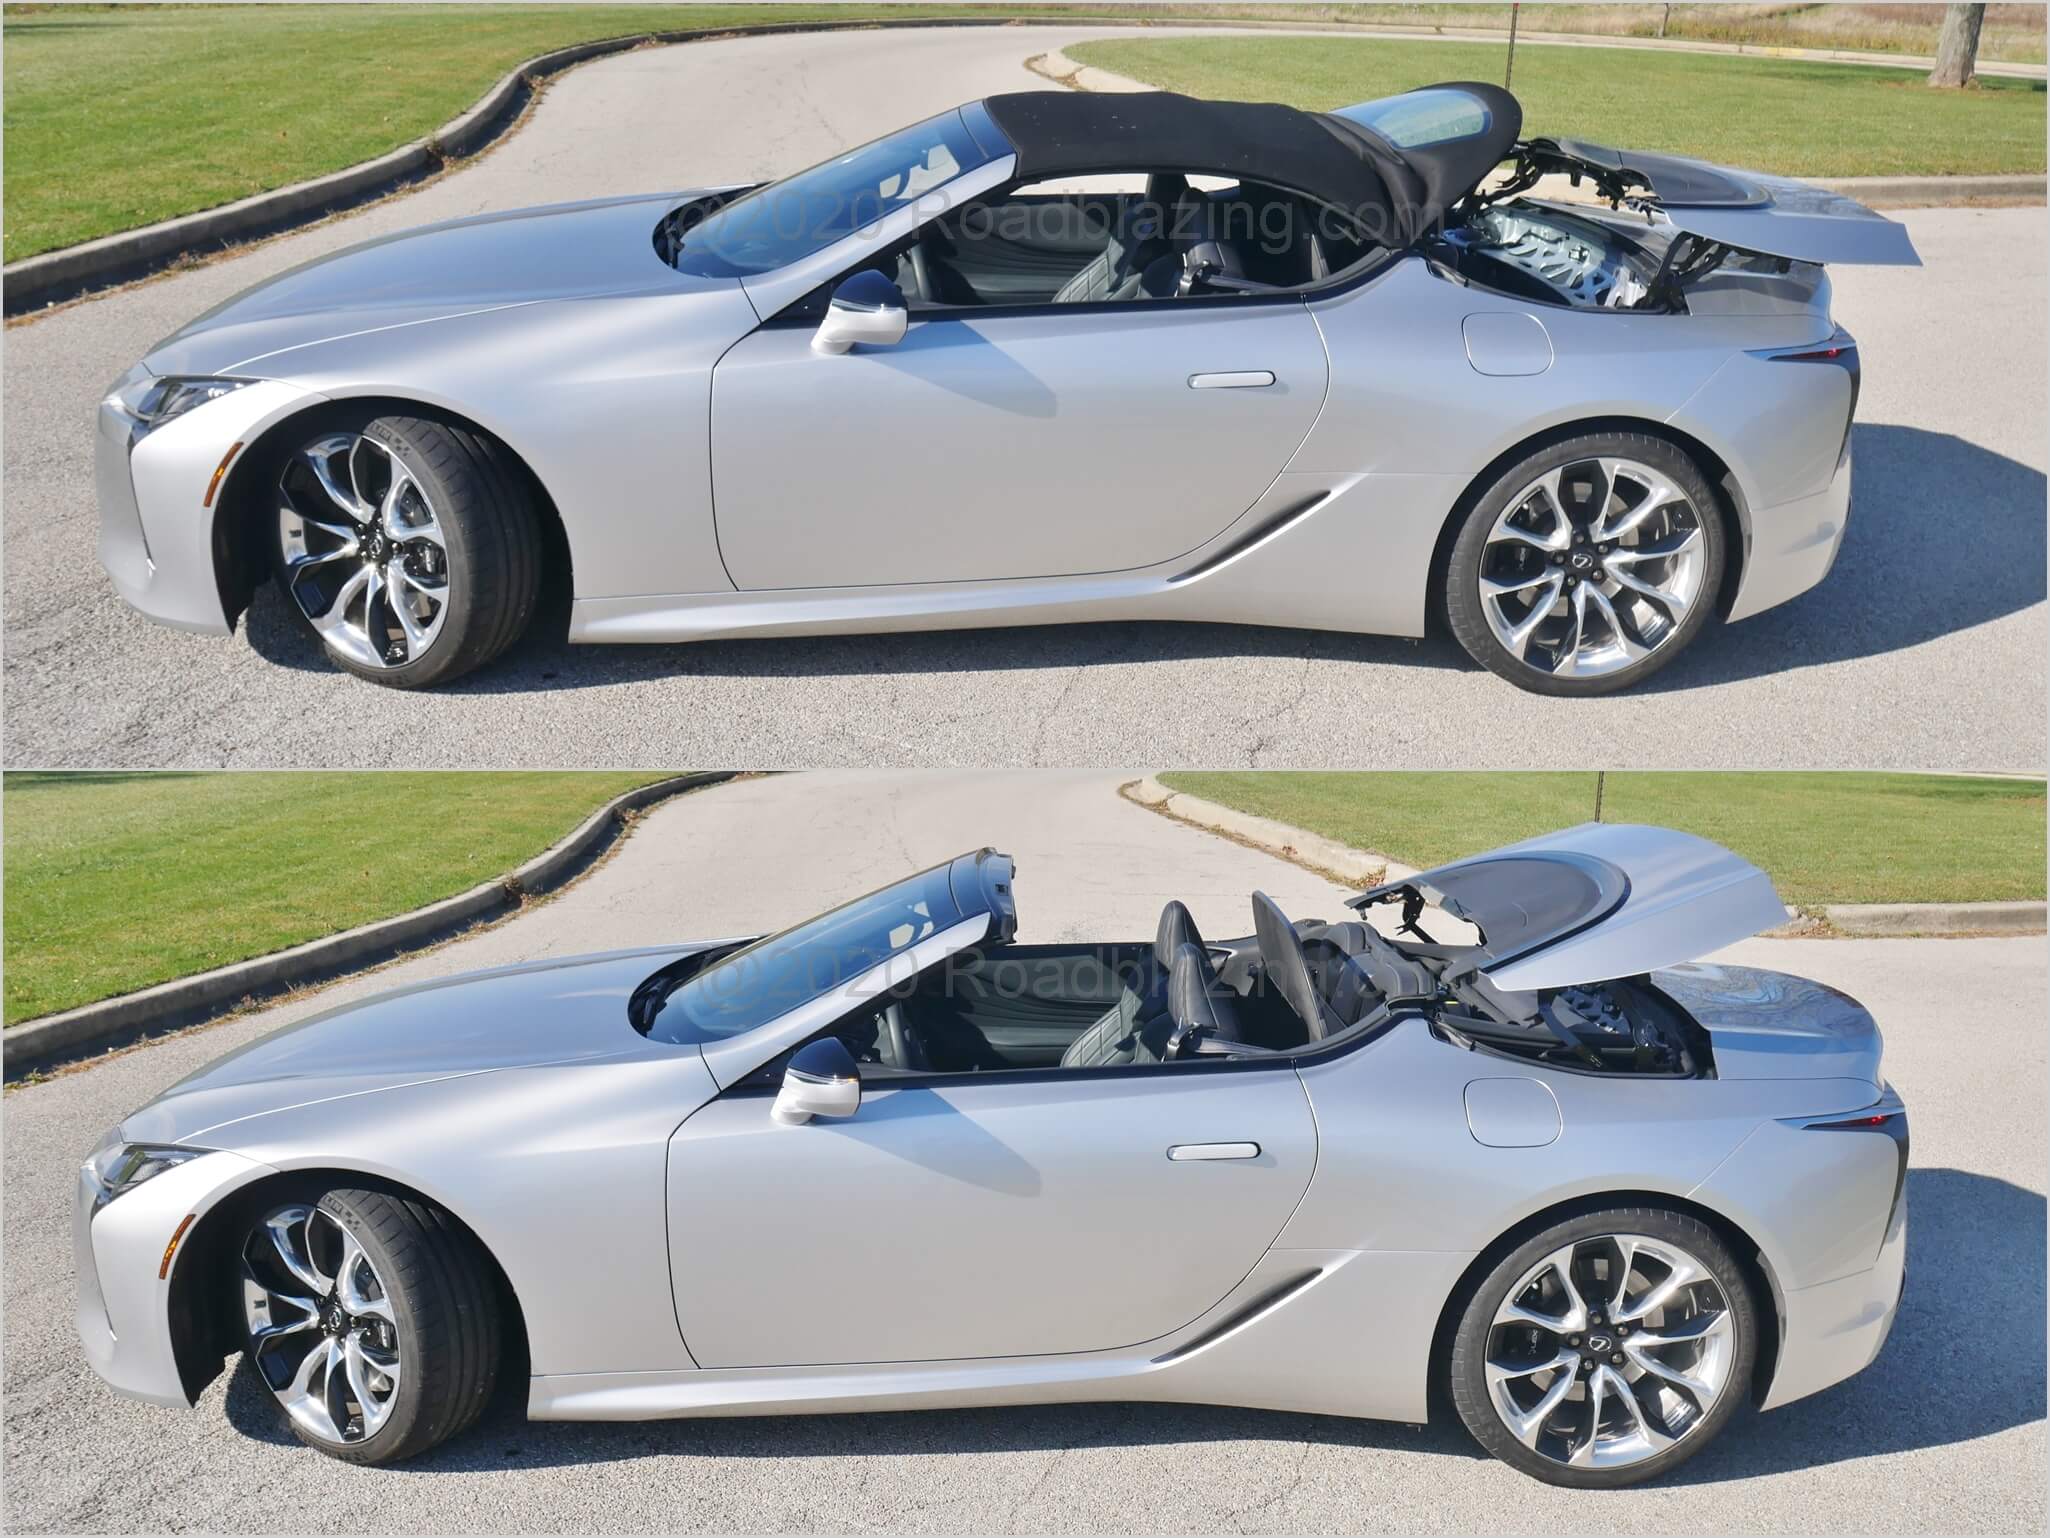 2021 Lexus LC 500 Convertible: 15 second ballet of soft roof & hard tonneau motors and hydraulic arms